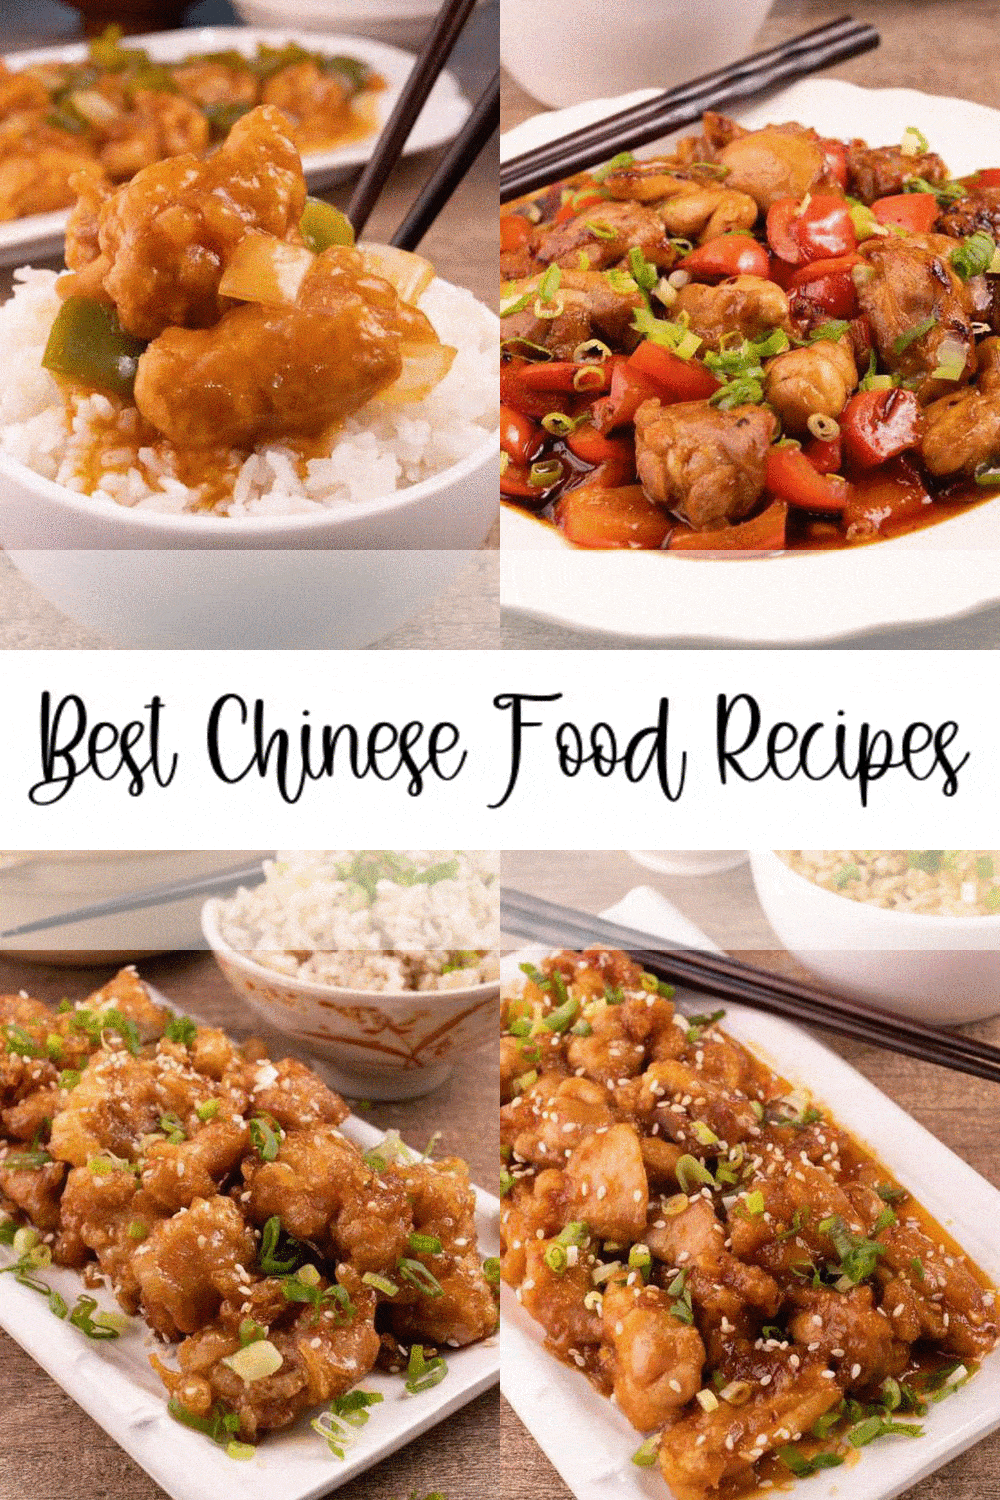 5 Chinese Food Recipes - Best Chinese Food Ideas